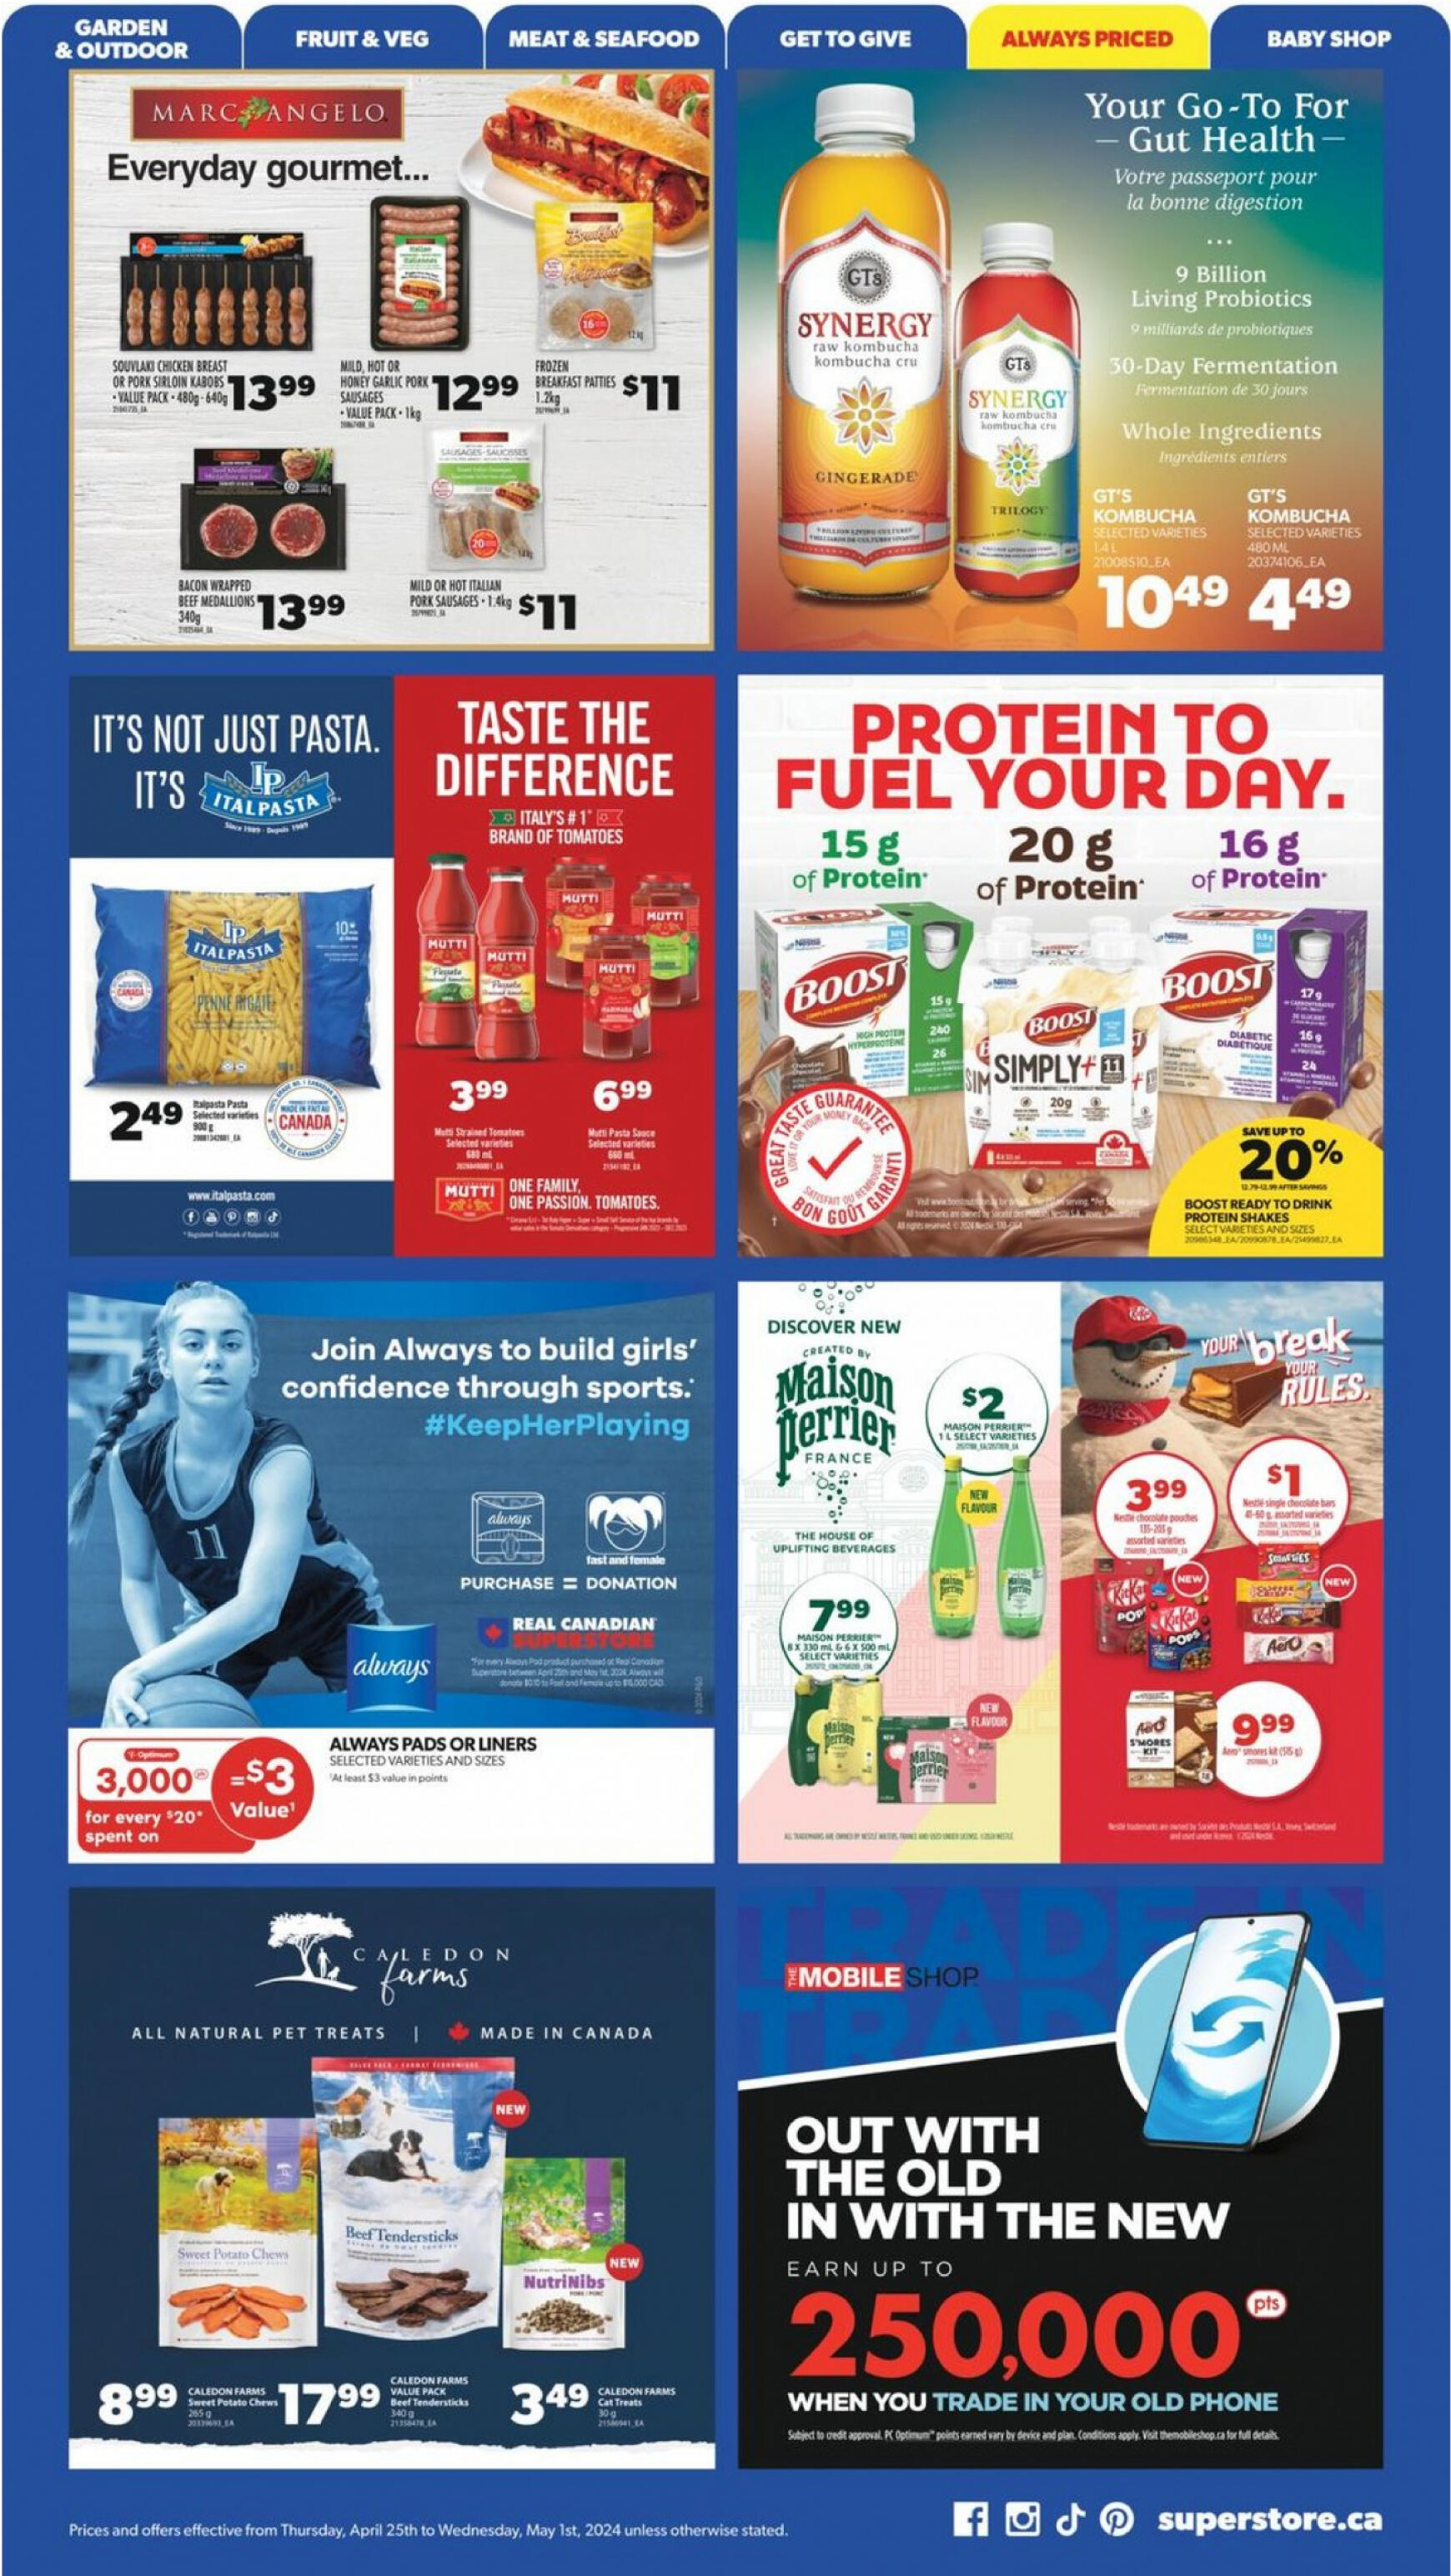 real-canadian-superstore - Real Canadian Superstore flyer current 01.05. - 31.05. - page: 29